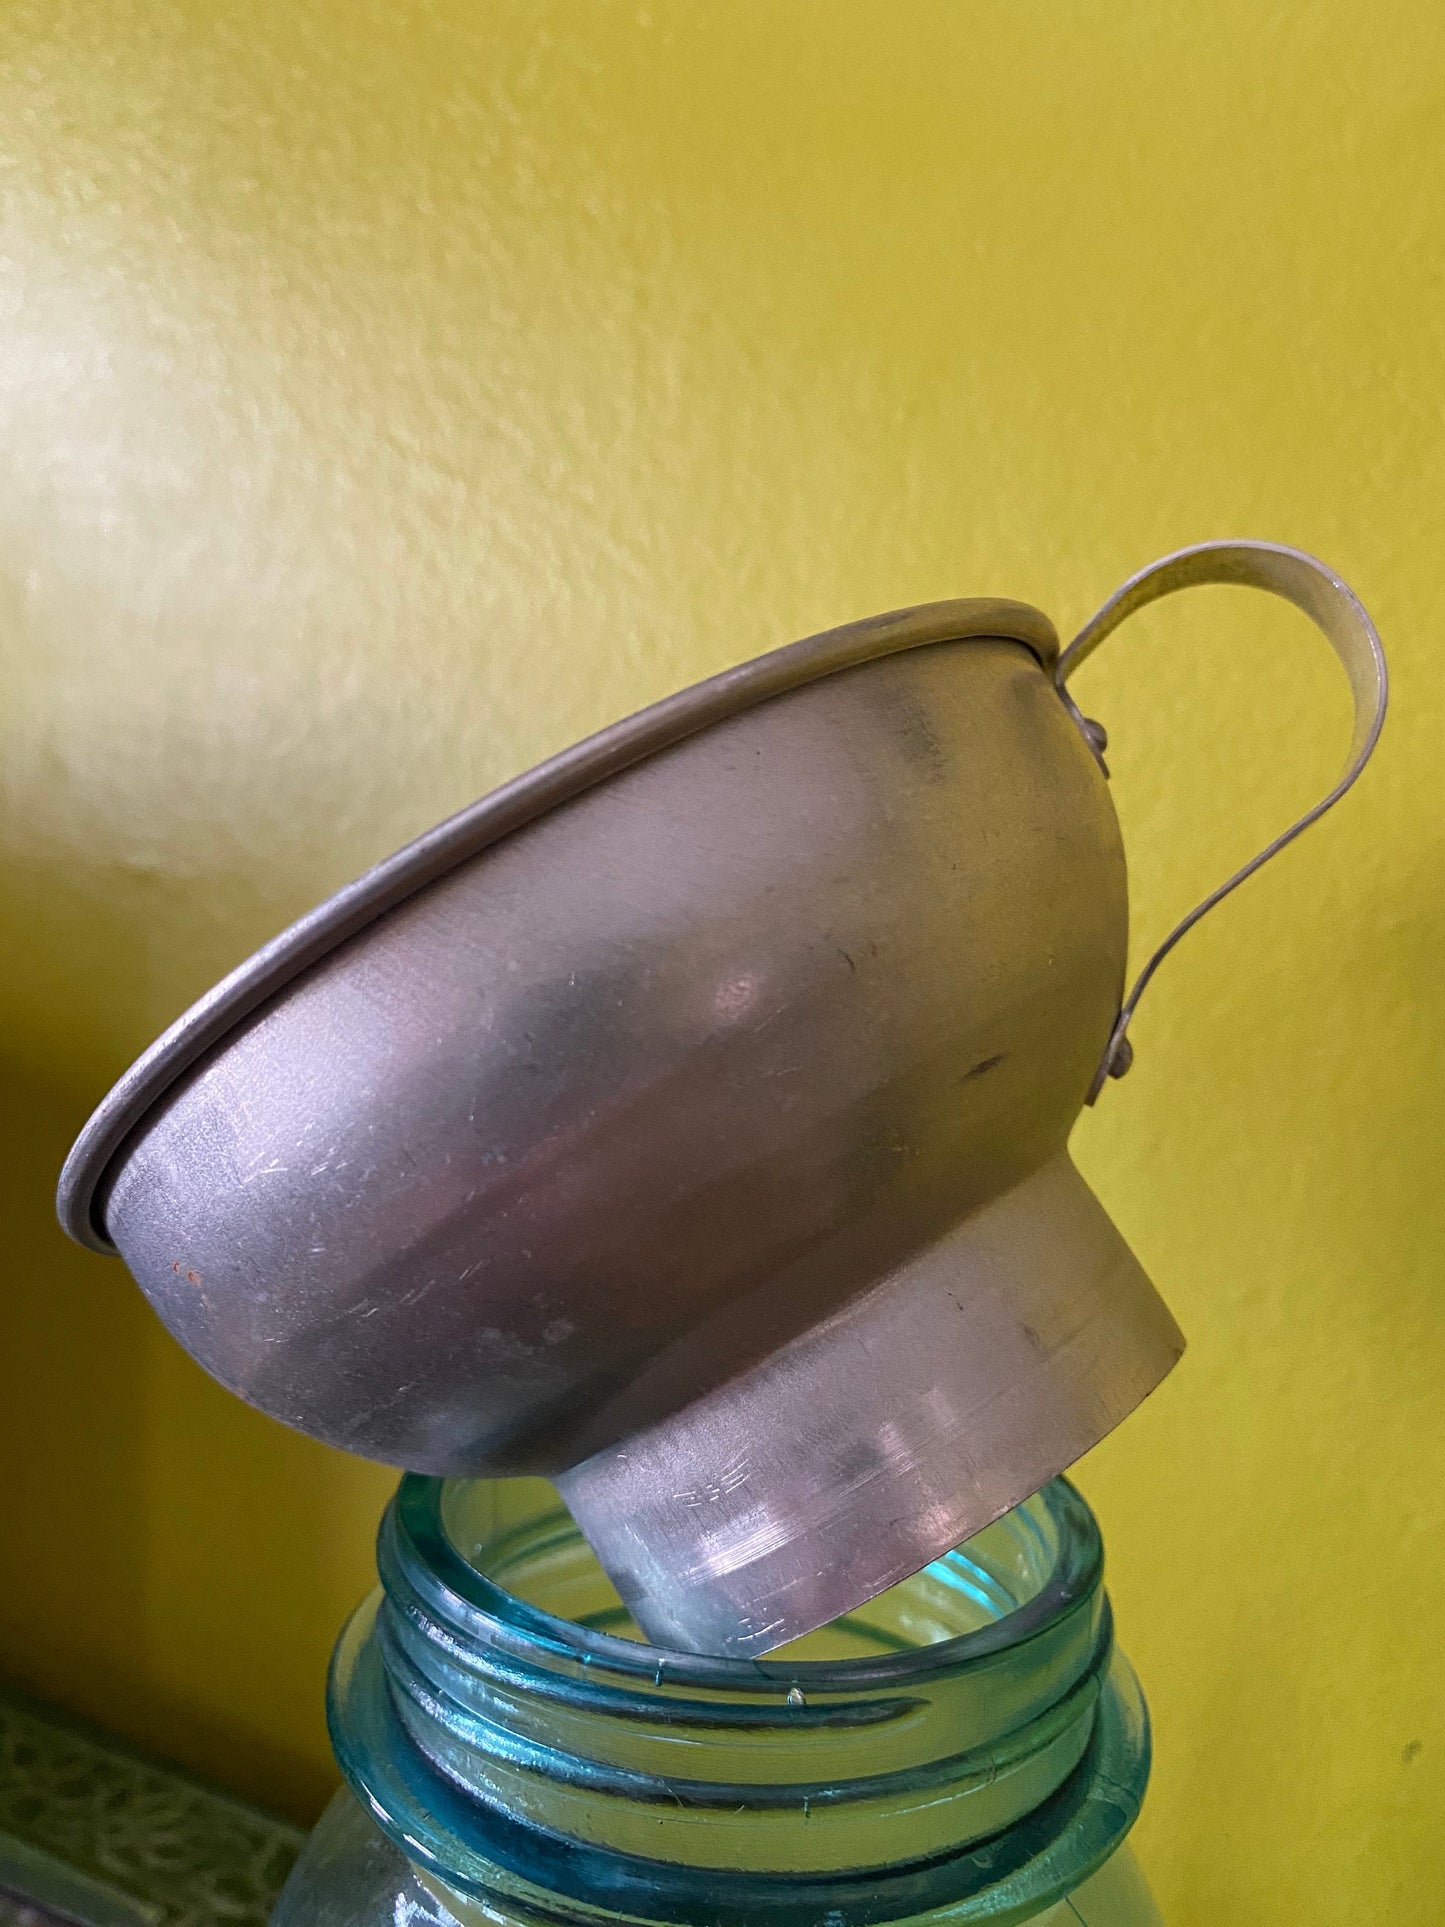 Vintage aluminum canning funnel for jam making, jar filling, preserving / made-to-last / well used & well loved / narrow mouth fits most